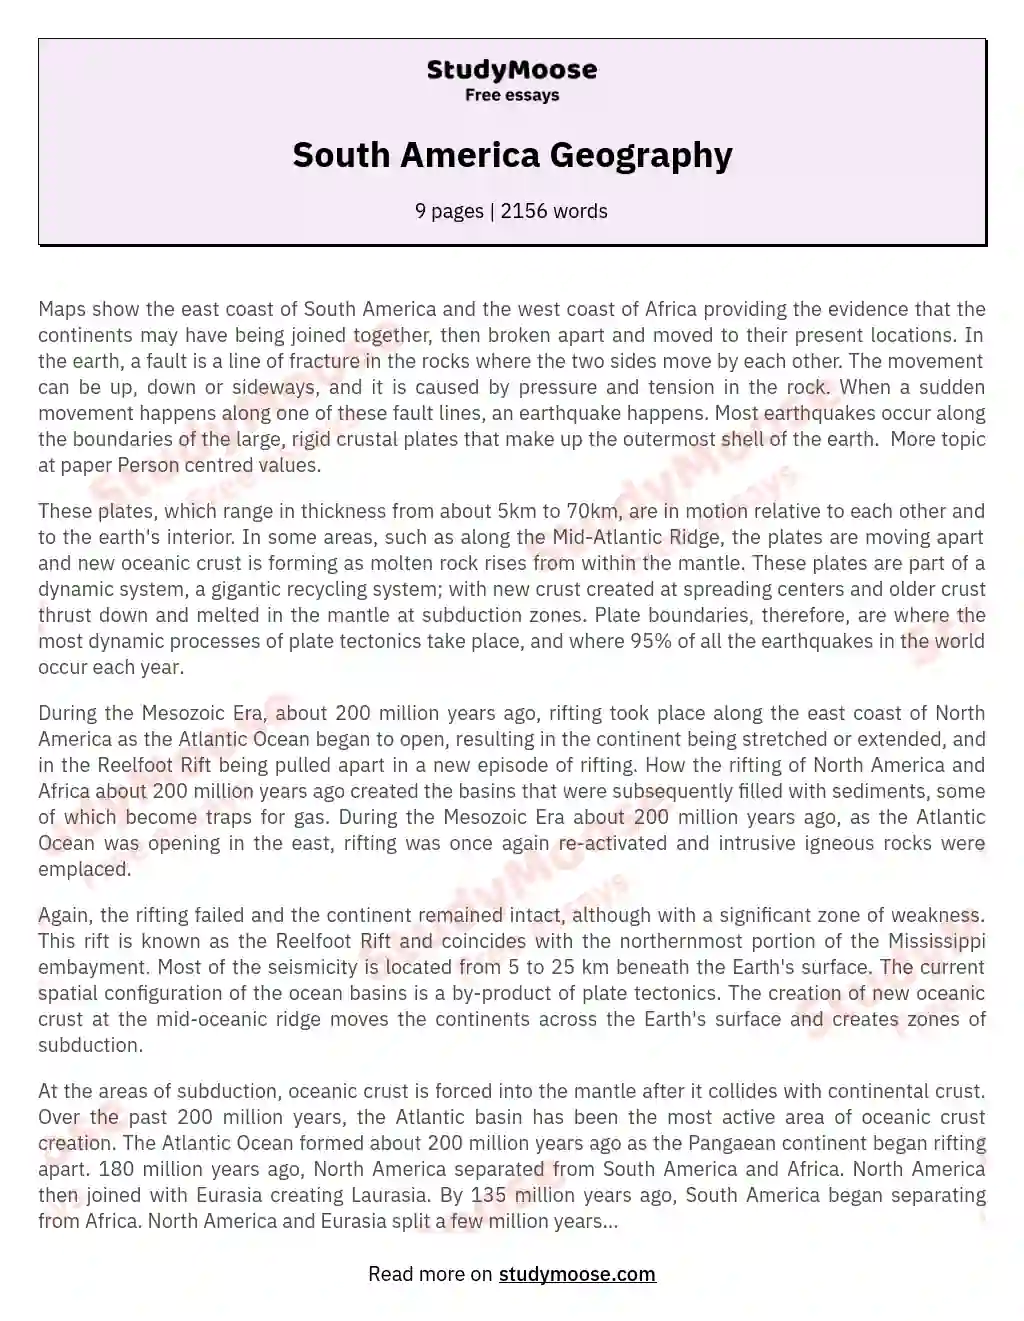 essay about south america